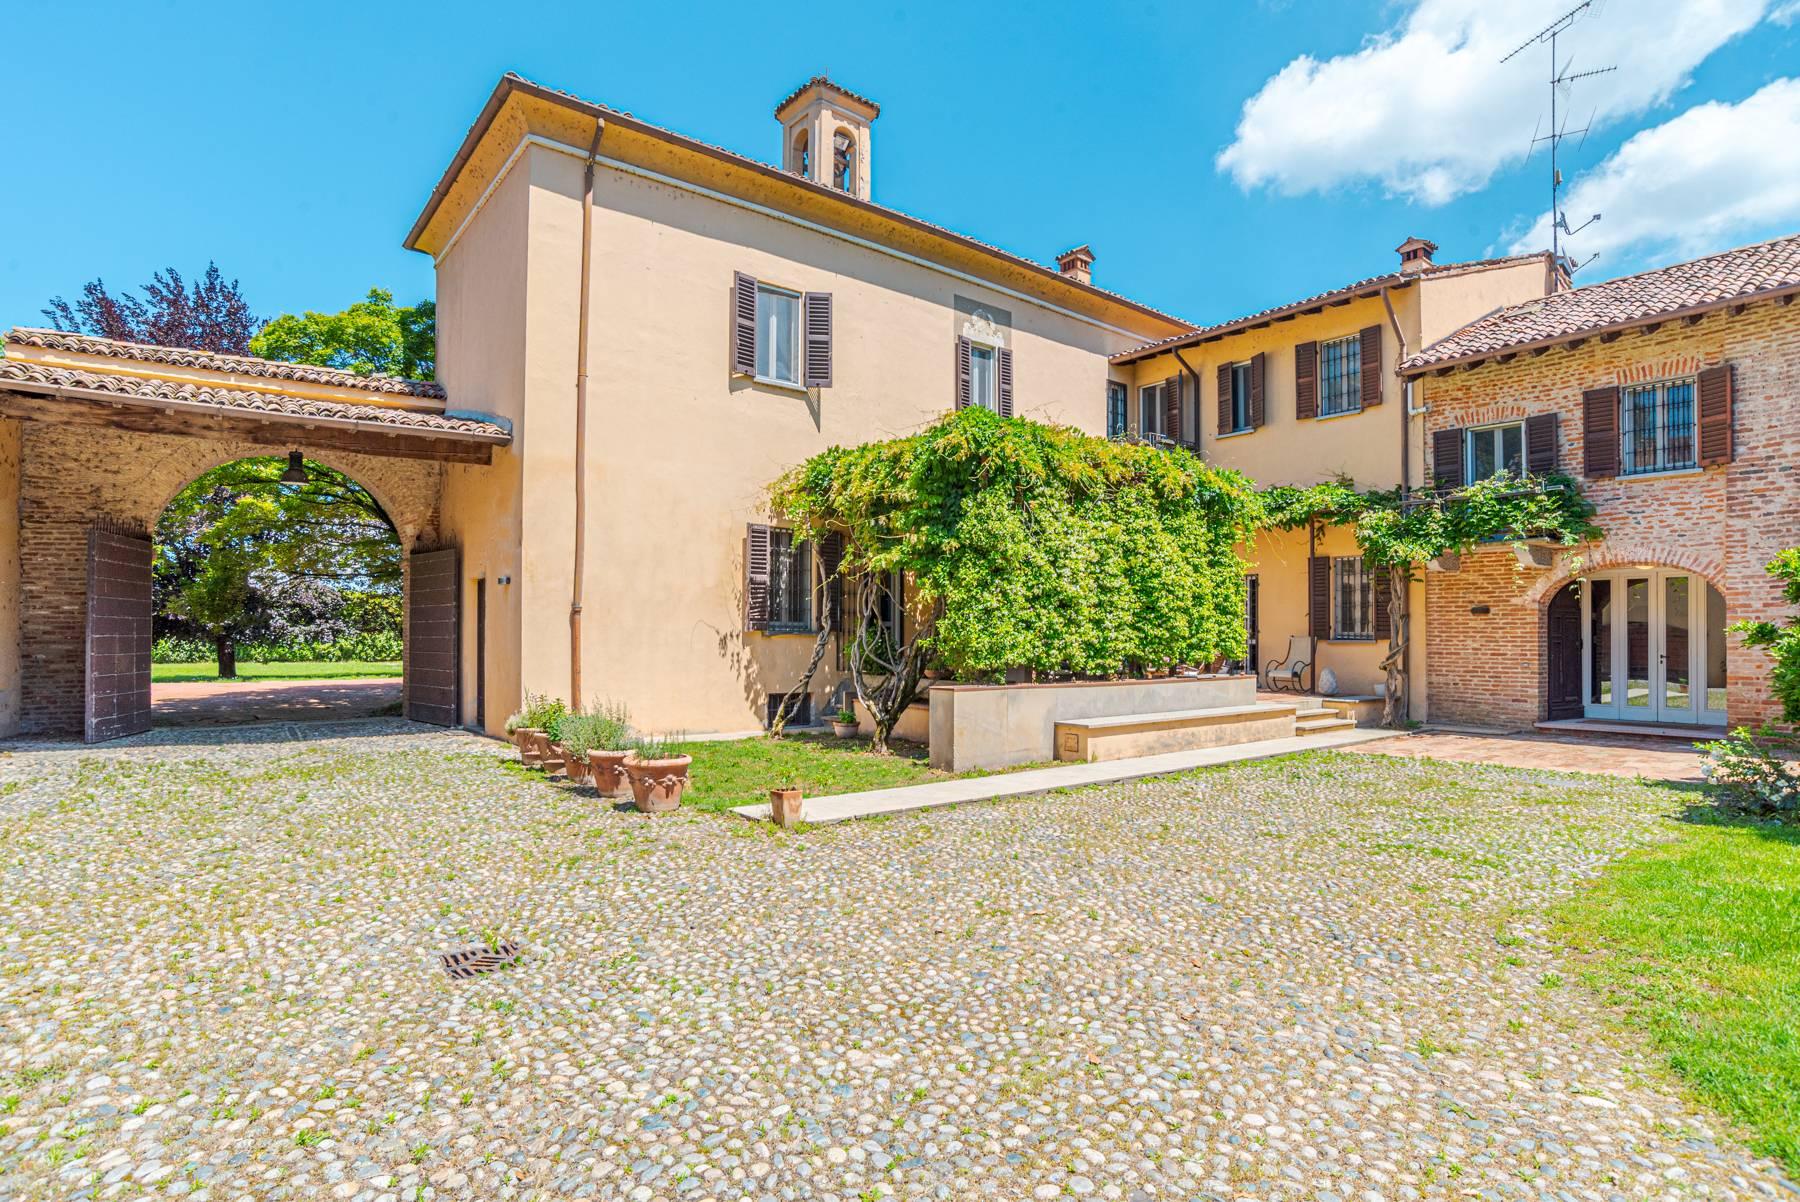 Magnificent property surrounded by greenery in Pavia - 1